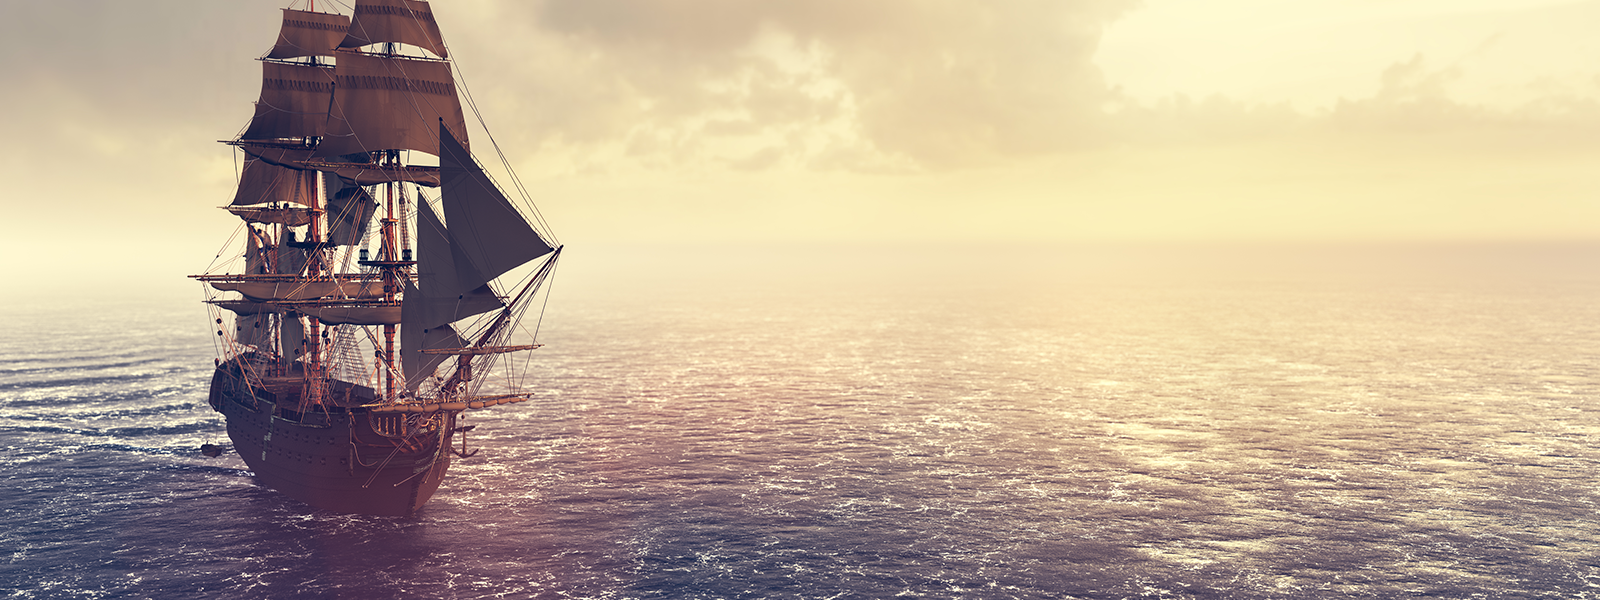 Wk23 // From Pirates to Peace of Mind: The Evolution of Personal Insurance